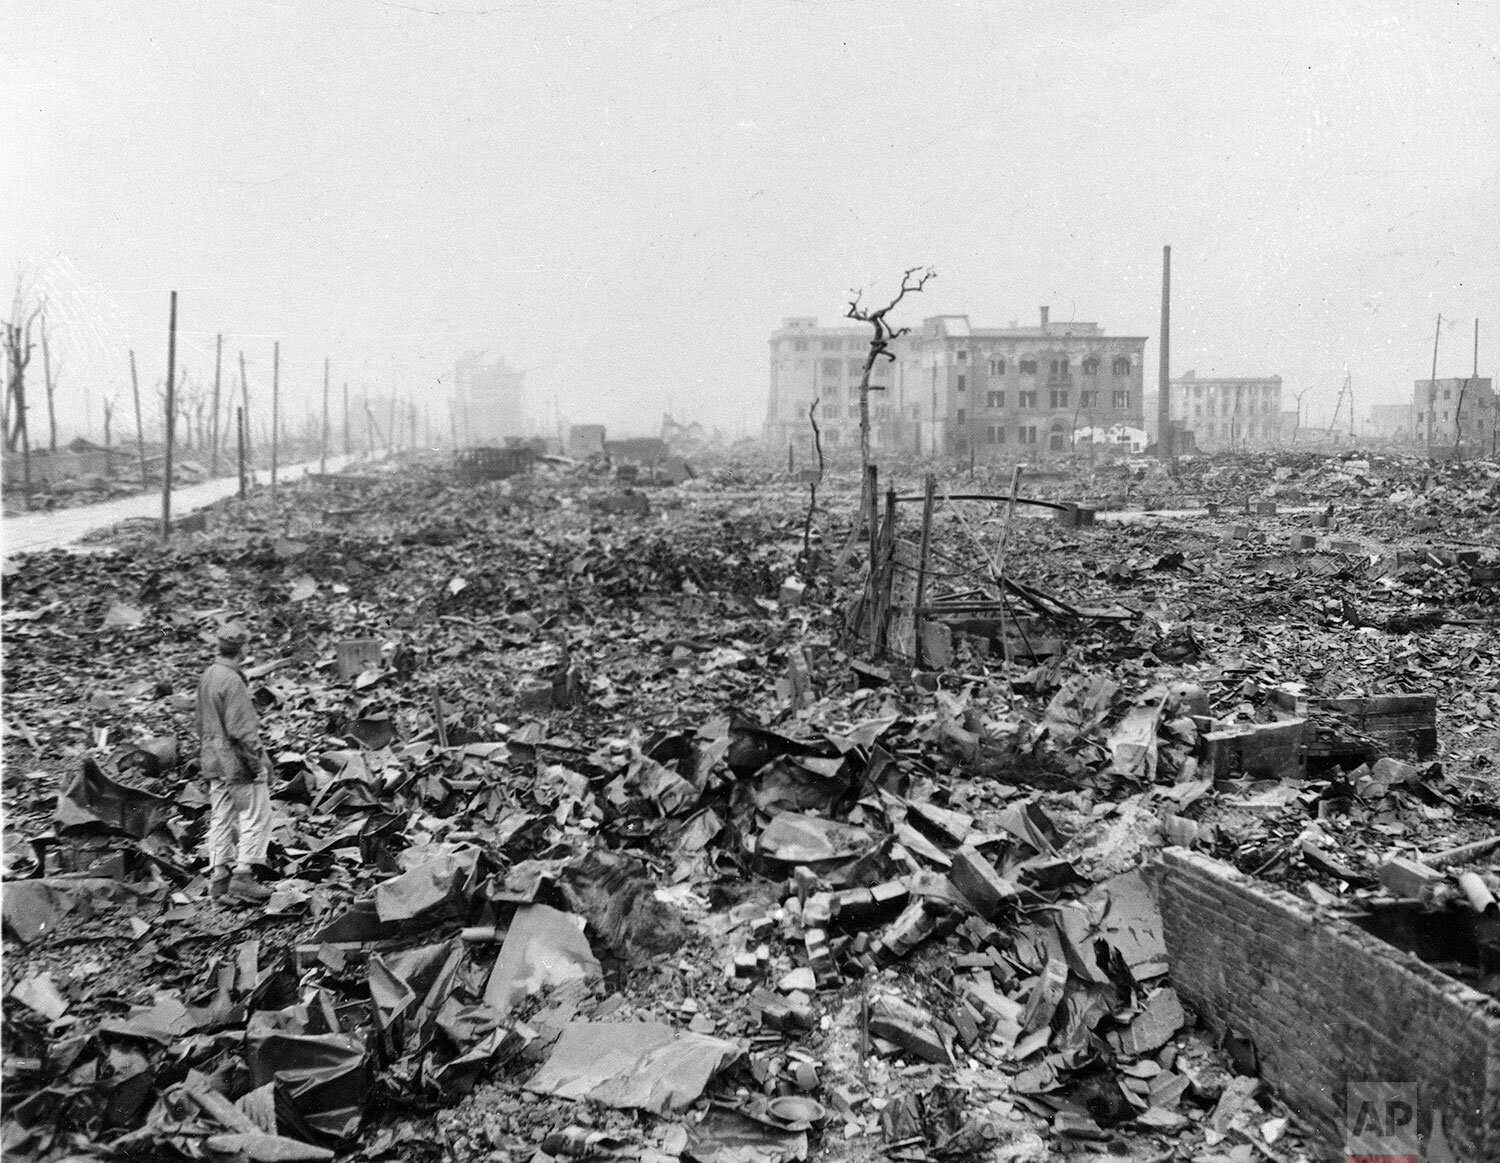  In this 1945 file  photo, twisted metal and rubble marks what once was Hiroshima, Japan's most industrialized city, seen some time after the atom bomb was dropped here. (AP Photo) 